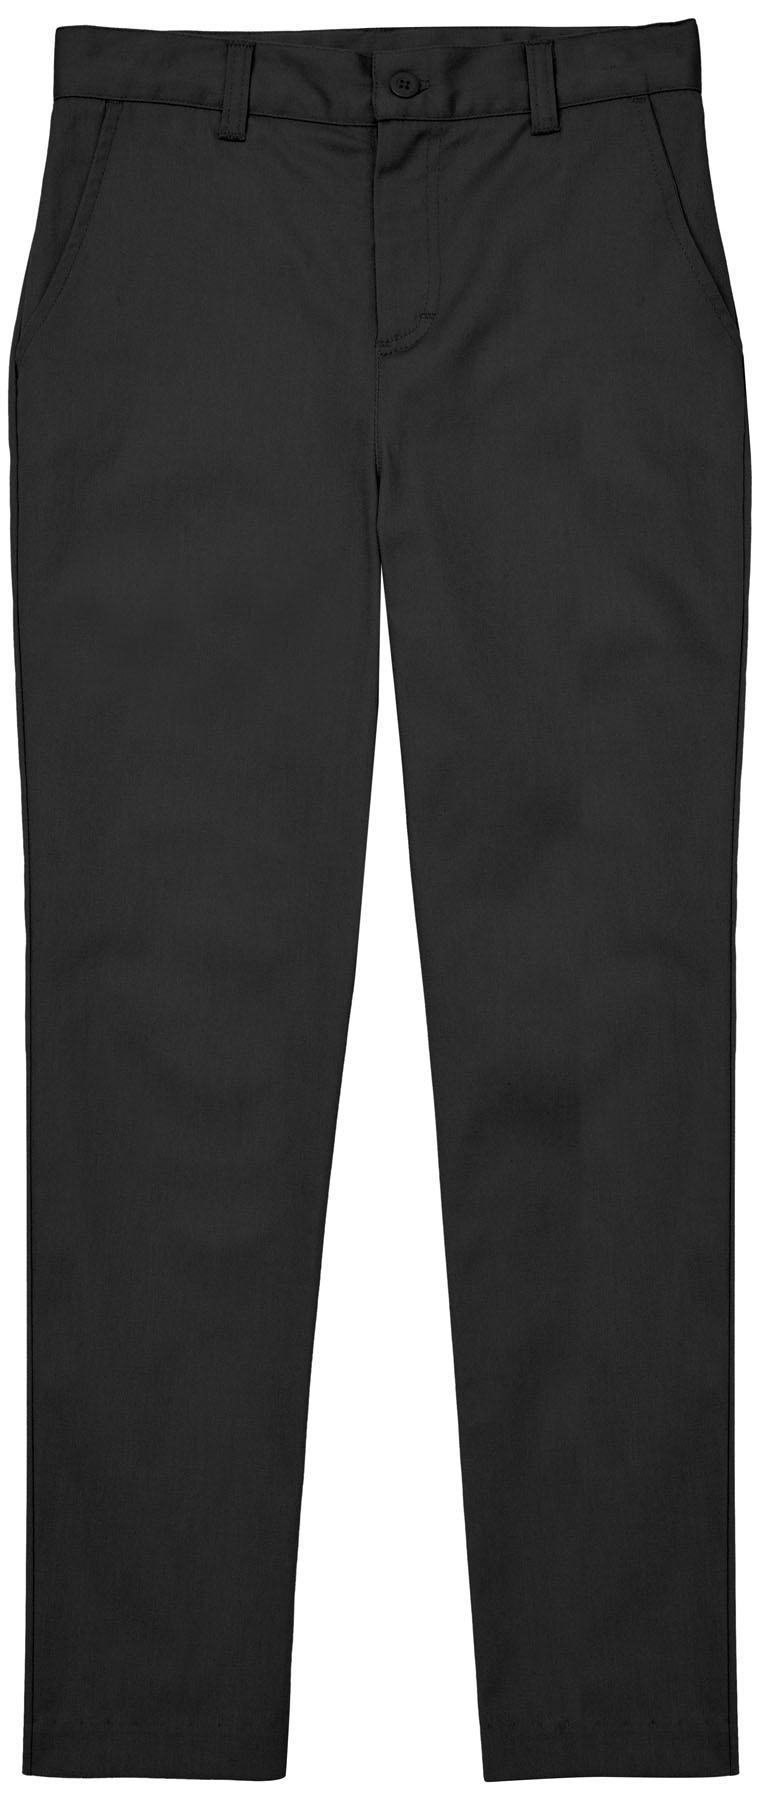 None CR101Y Girls Flat Front Pant